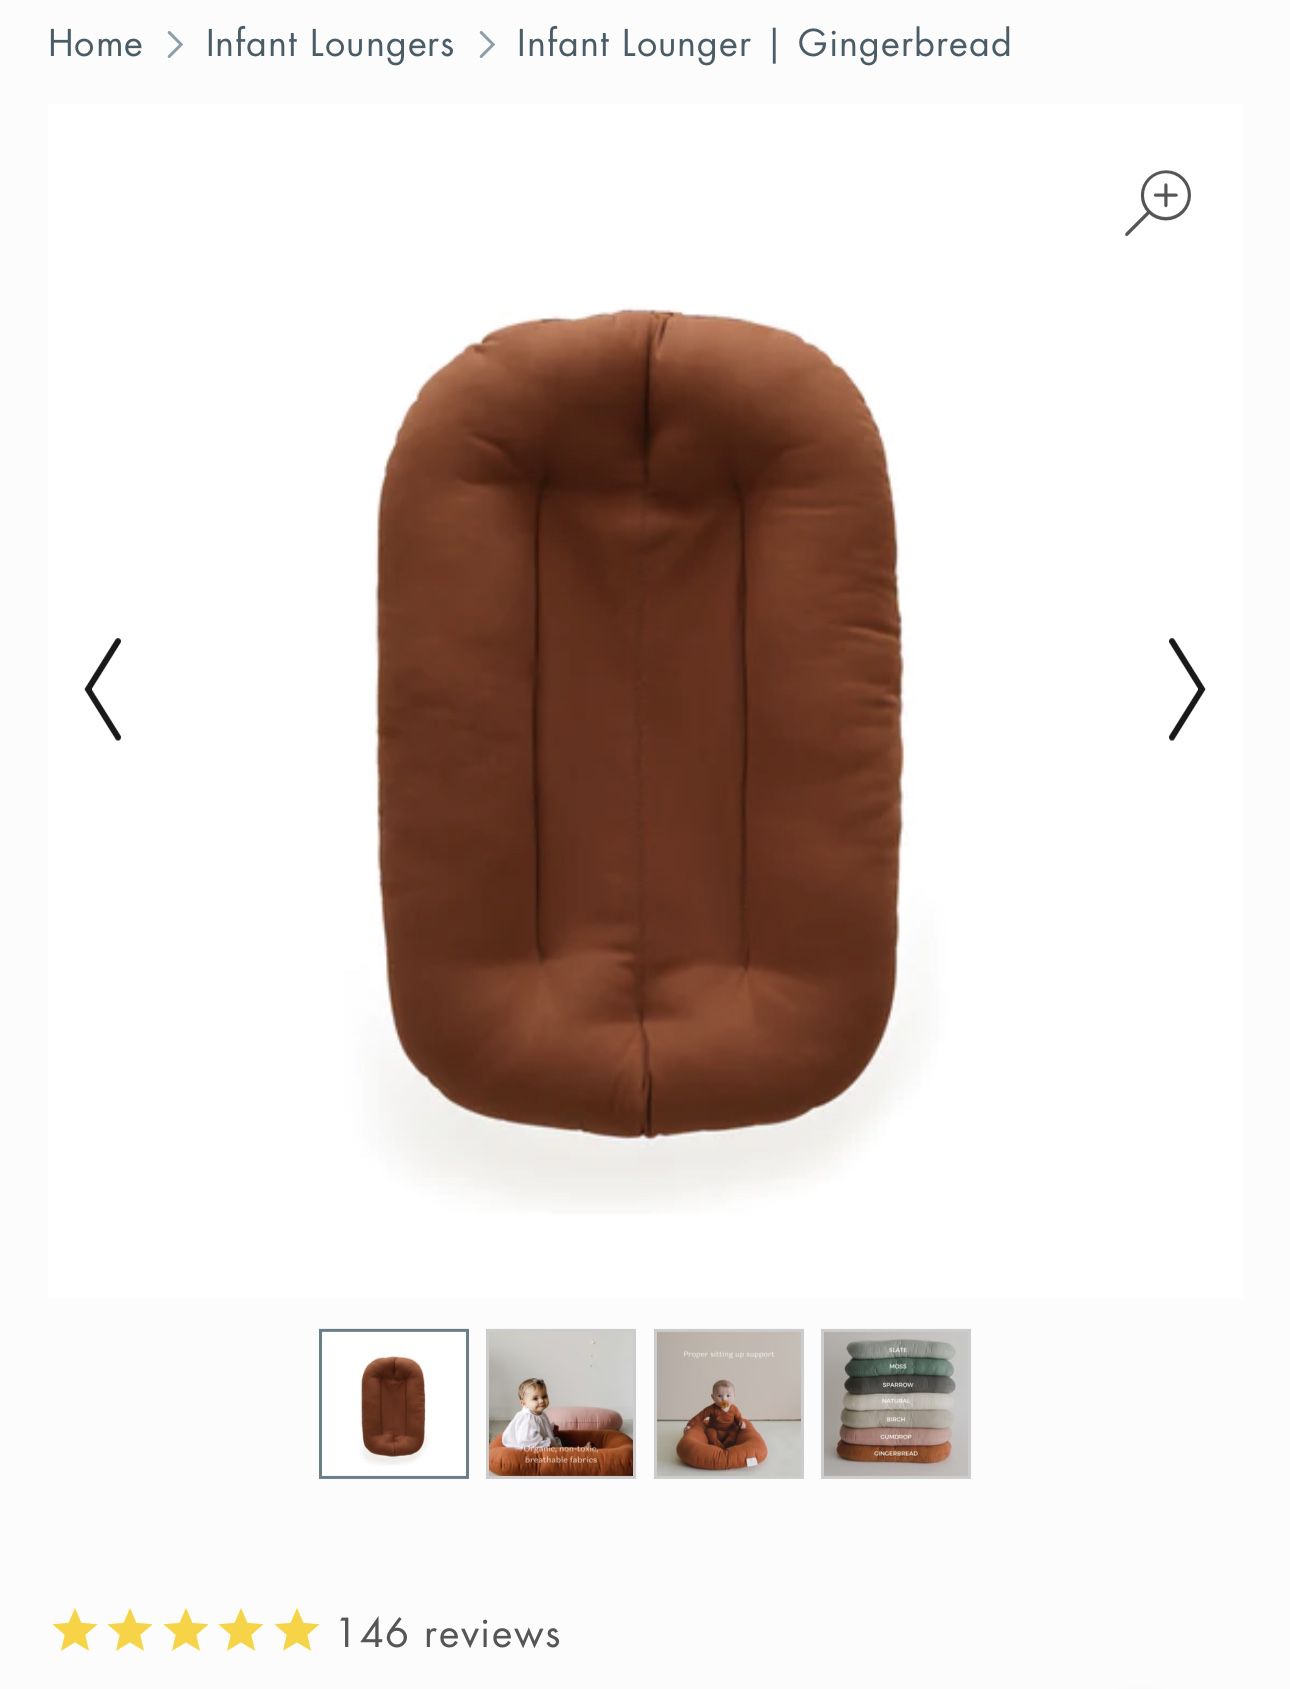 The Snuggle Me Baby Lounger 